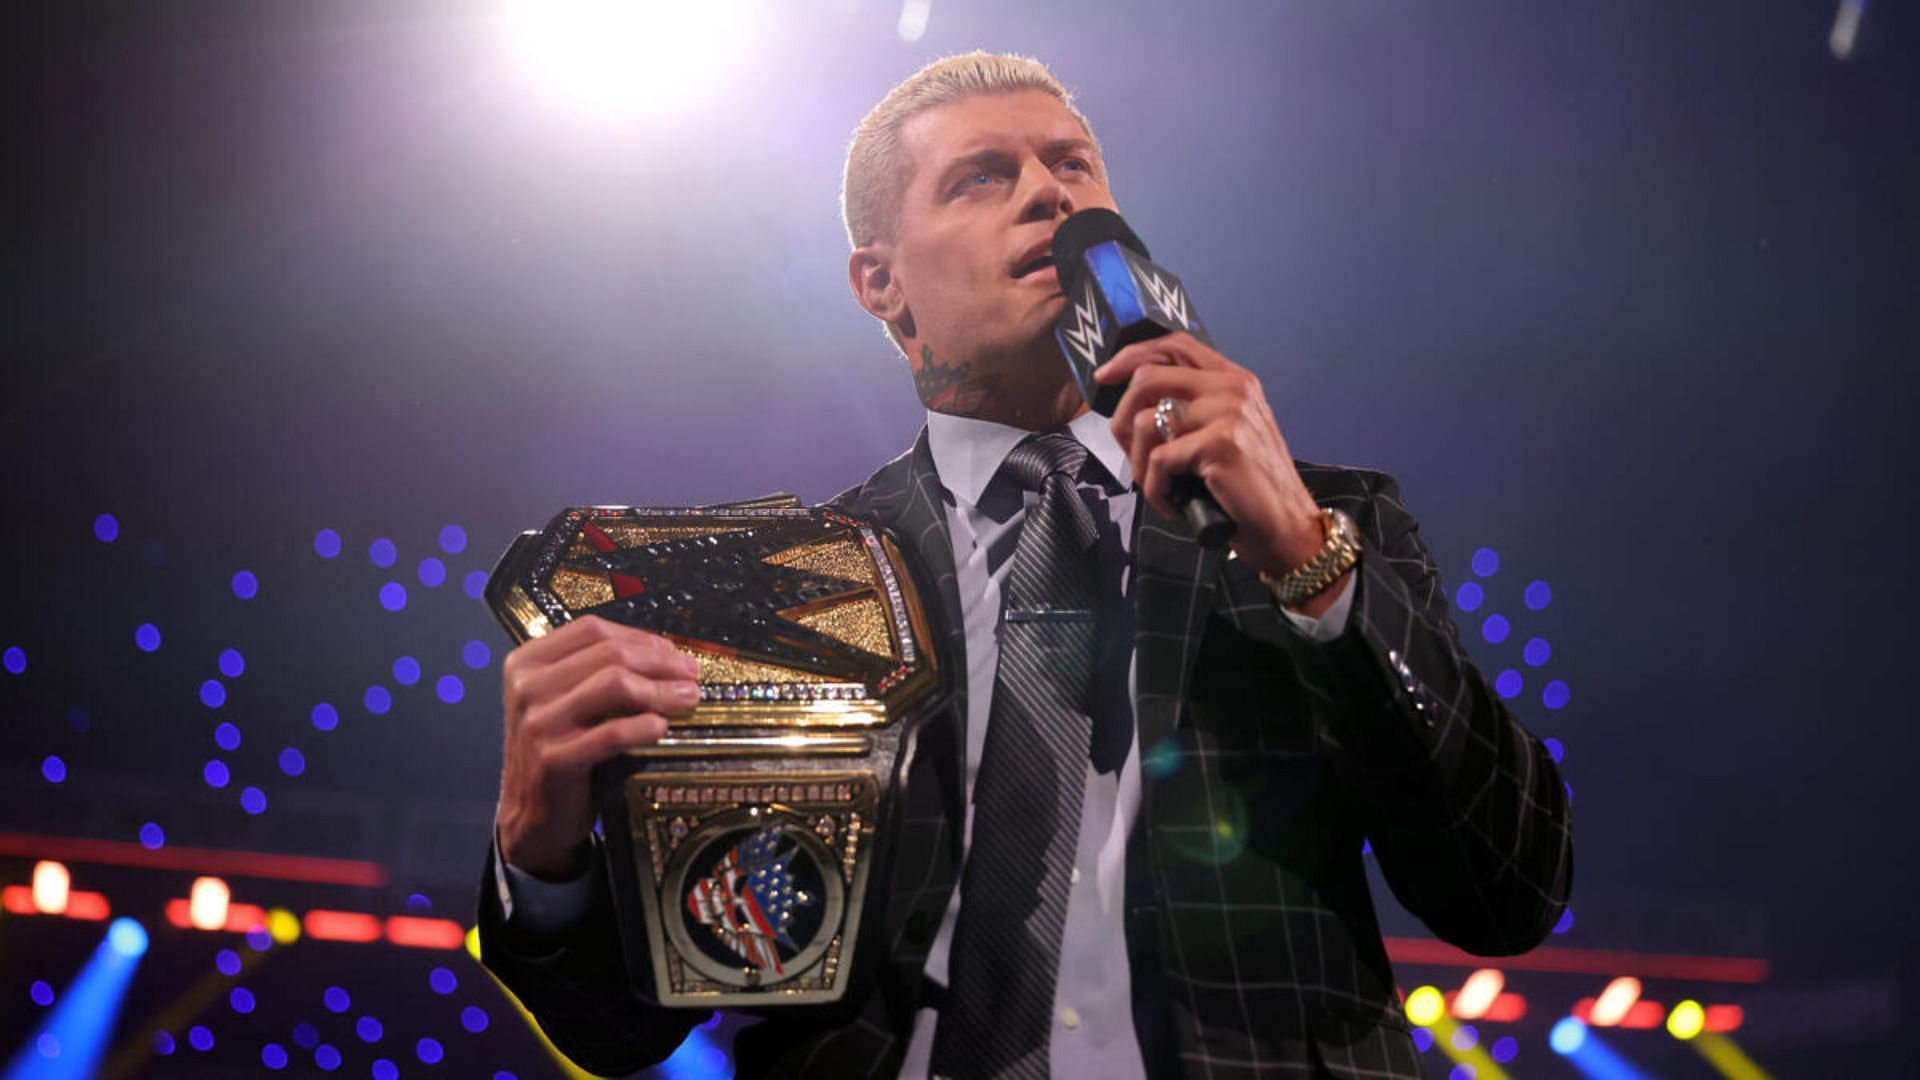 Cody Rhodes is the Undisputed WWE Champion (Image credit: WWE)